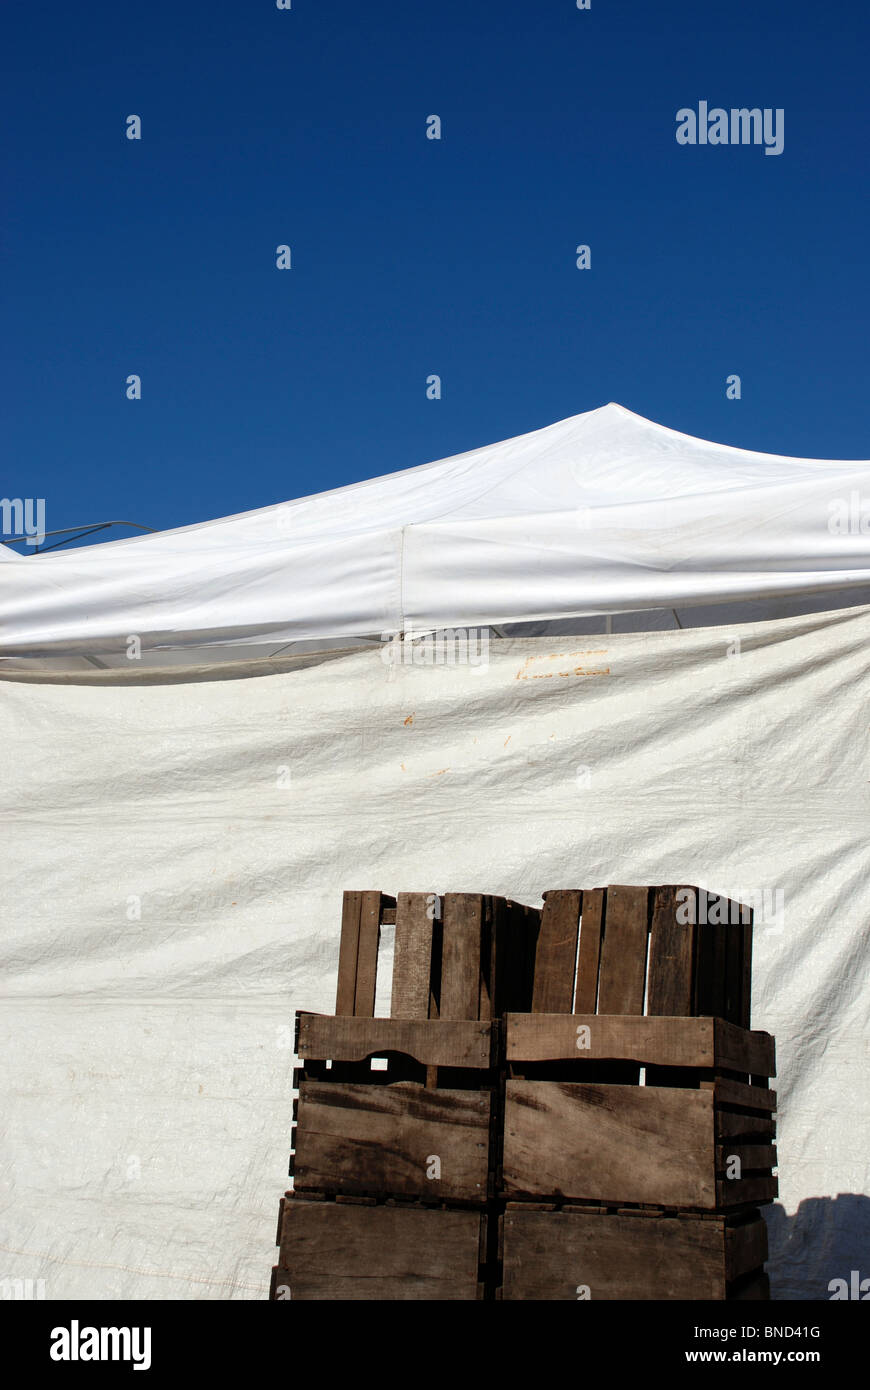 Wooden crates against a white tent at a farmers' market under a clear blue sky. Stock Photo